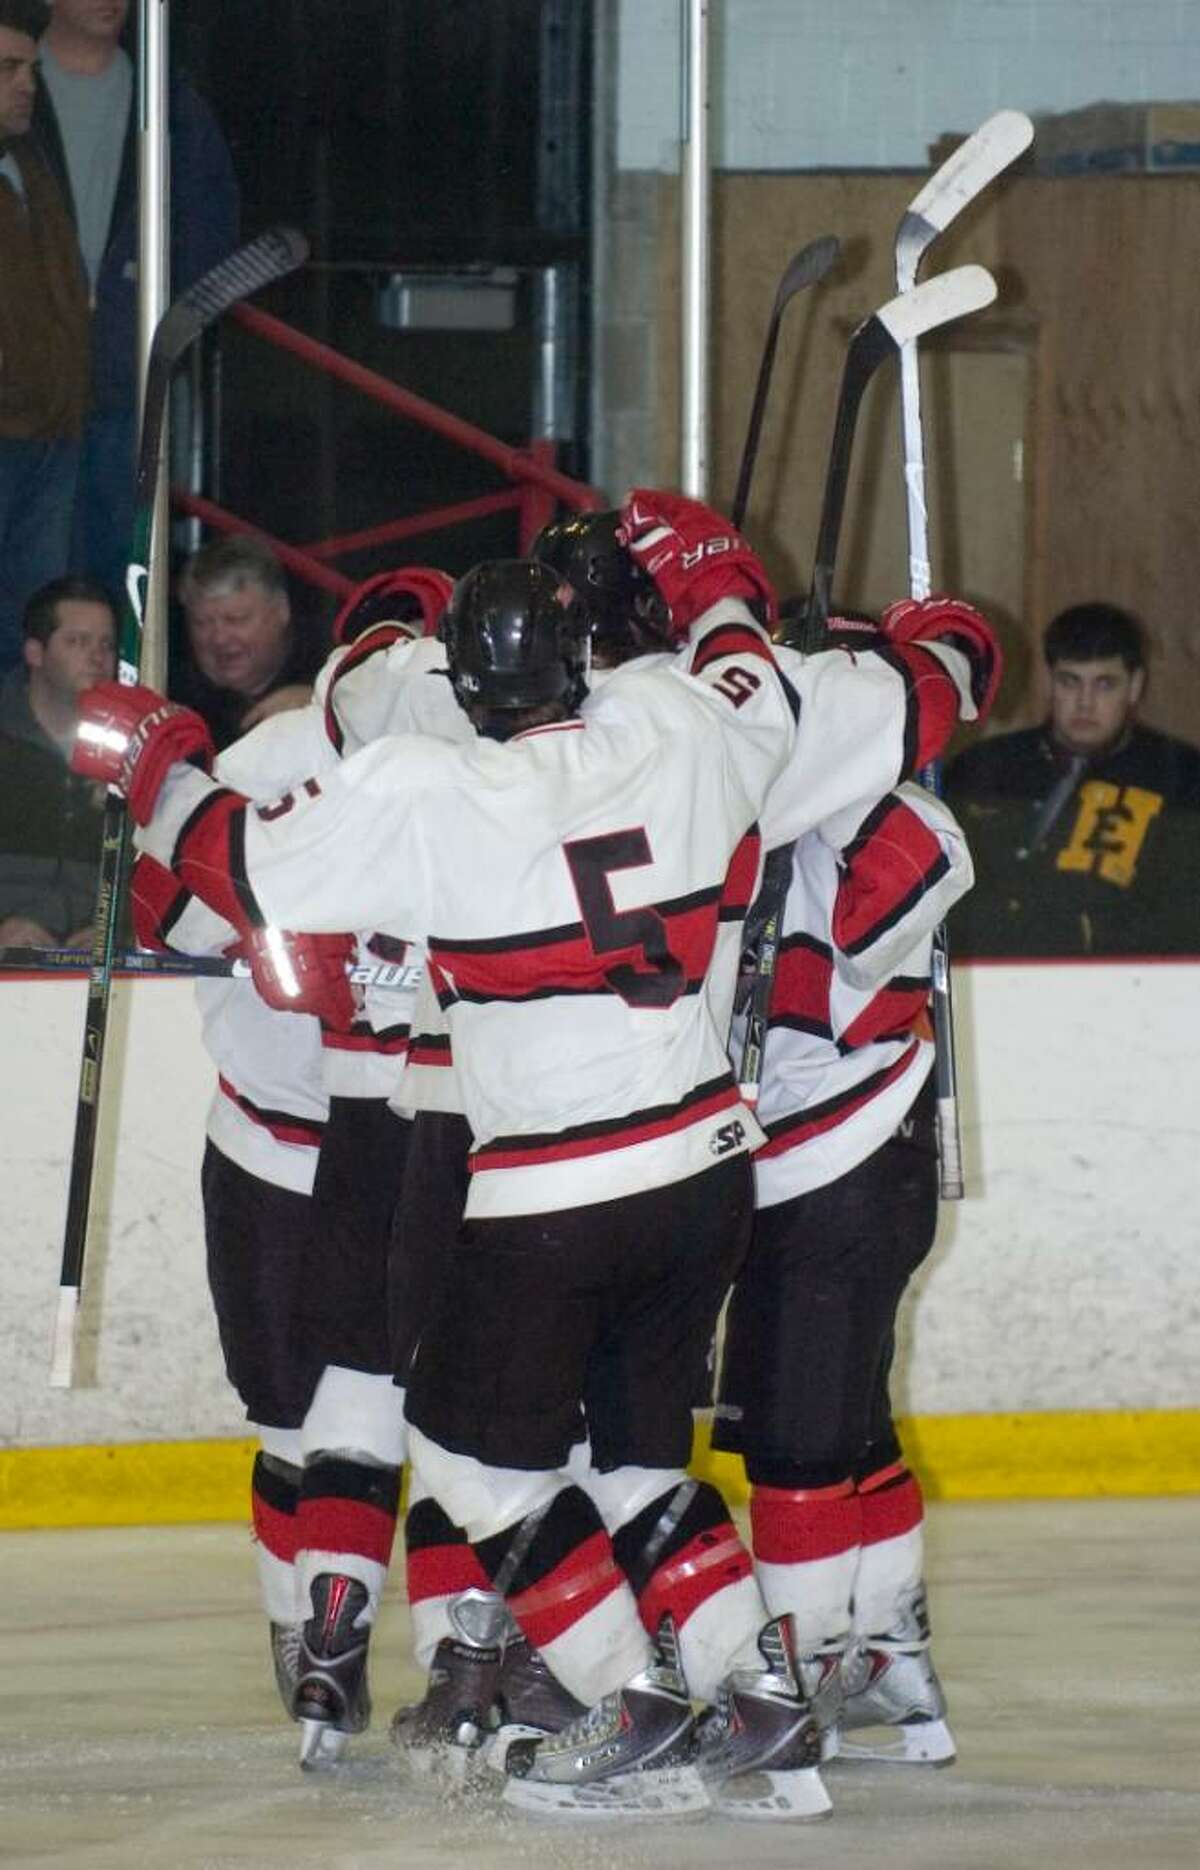 New Canaan celebrates after scoring a goal during the first round of the CIAC Division I ice hockey tournament at the Darien Ice Rink in Darien, Conn. on Wednesday, March 10, 2010.